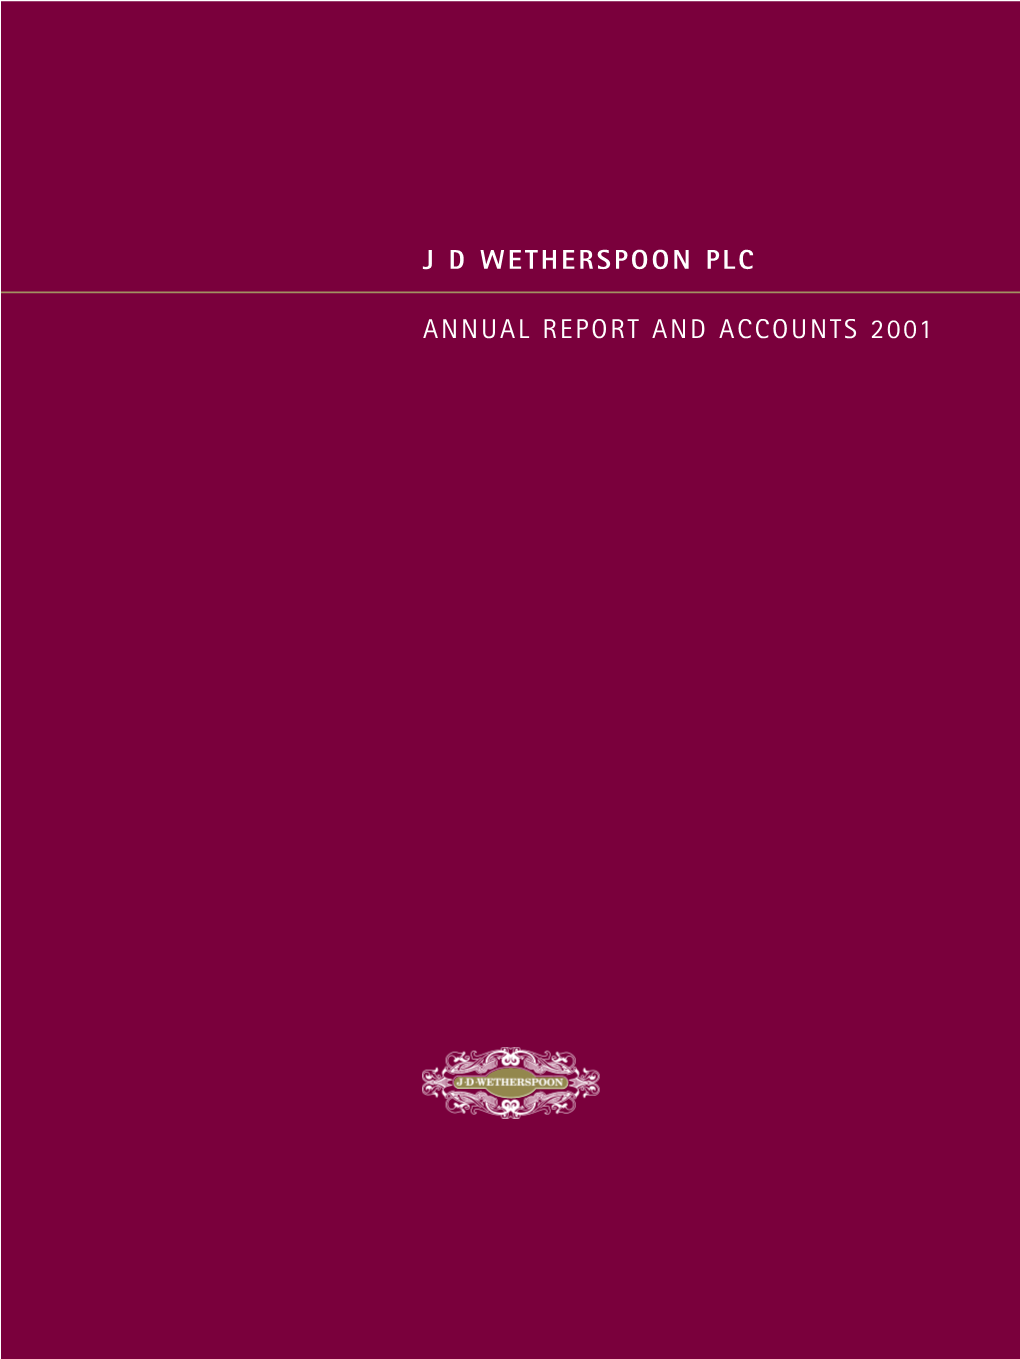 J D WETHERSPOON PLC ANNUAL REPORT and ACCOUNTS 2001 1 PUBLIC HOUSES NATIONWIDE at the End of July 2001, the Number of Pubs Nationwide Was 522